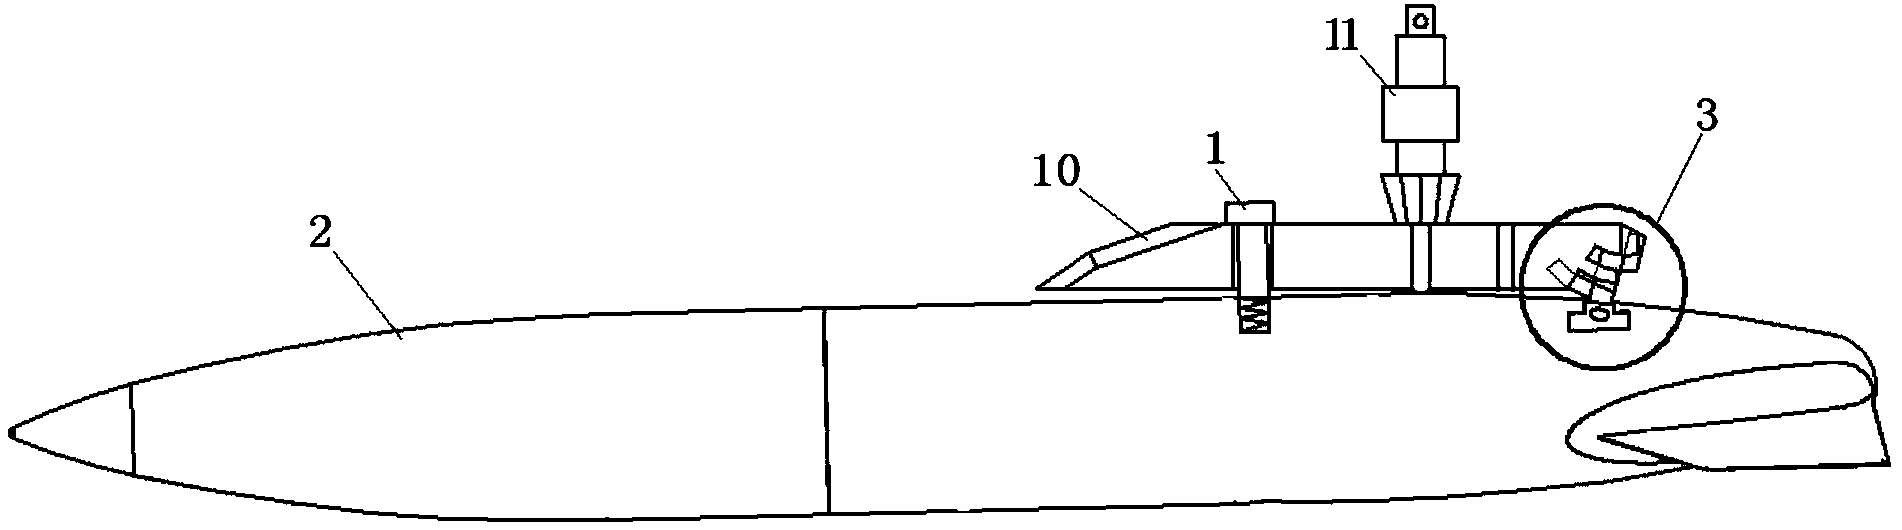 Wind tunnel separation simulation experiment system and method